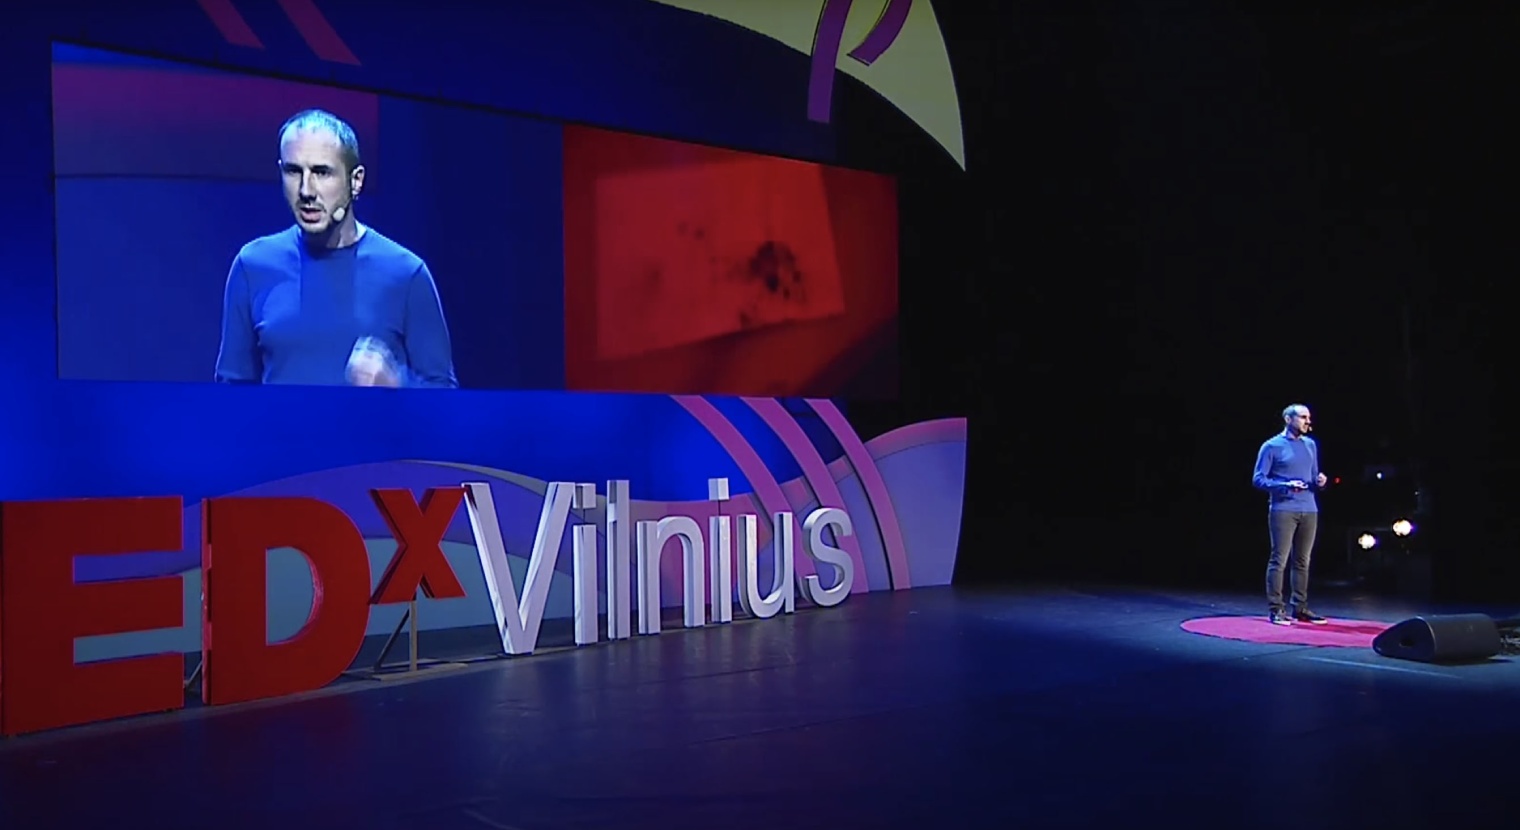 A man speaking on a large stage in front of a screen showing a realtime feed of the speech and a large red TEDx logo.